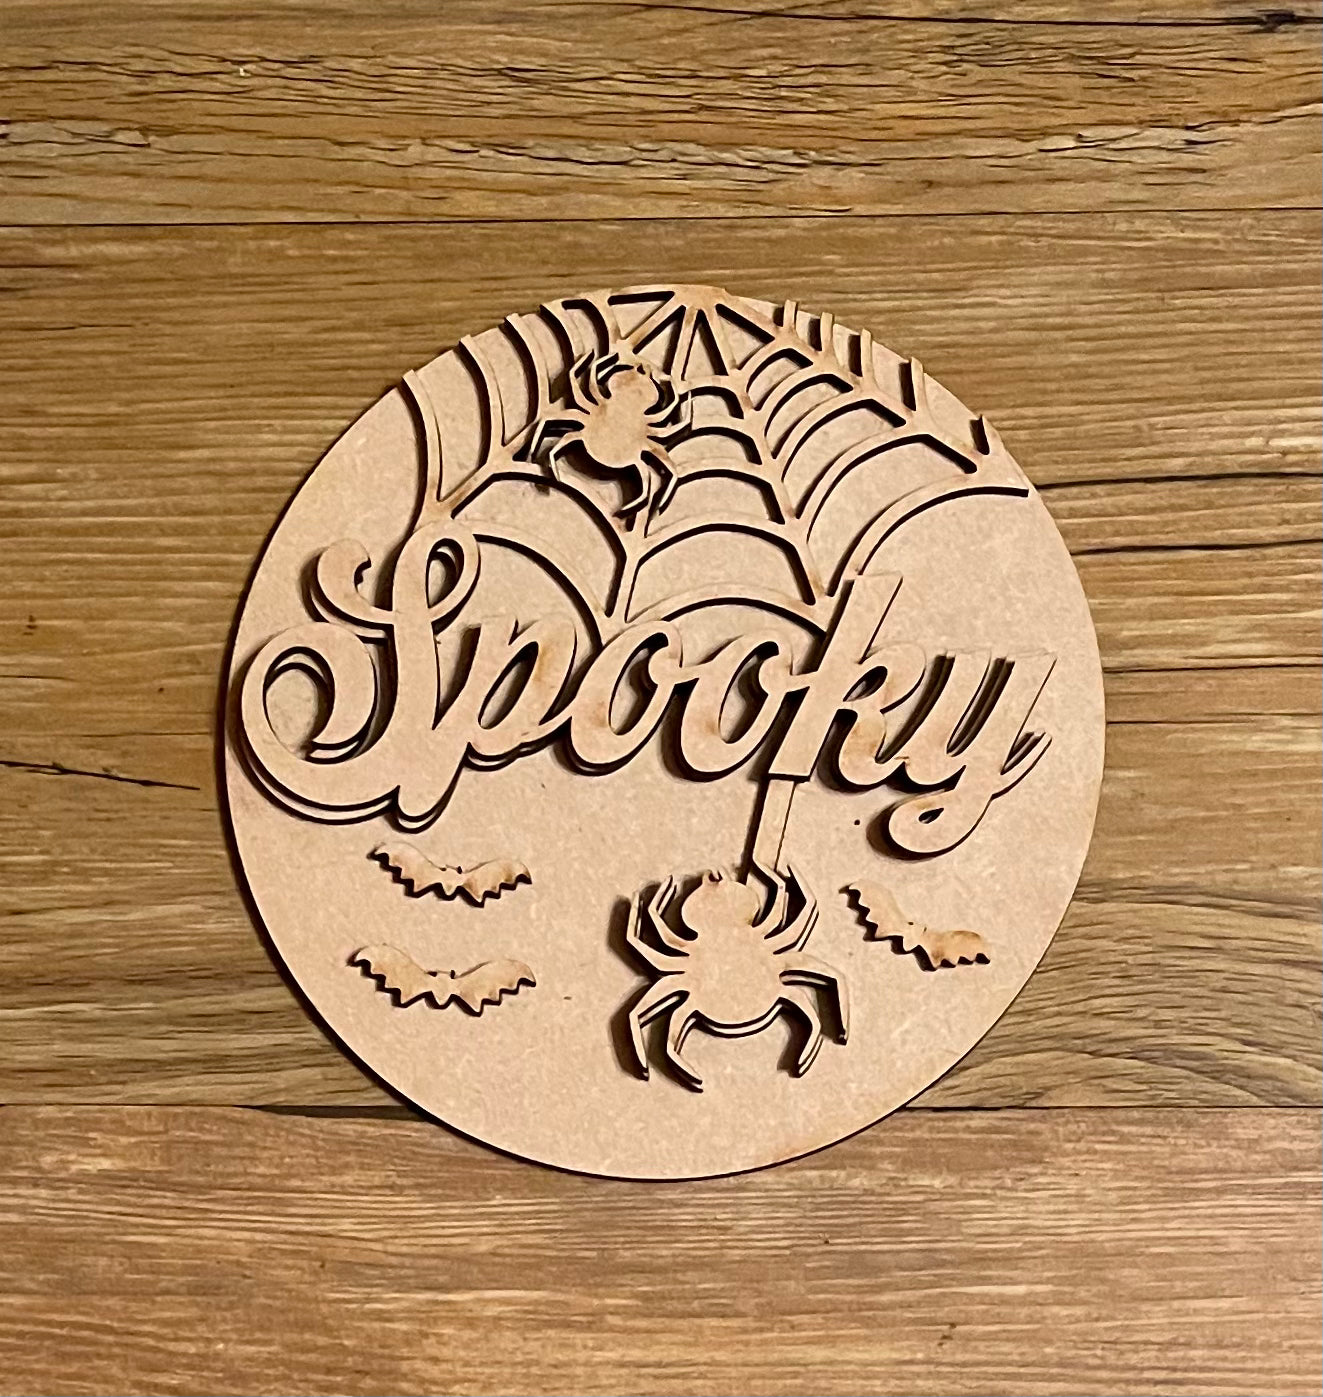 Spooky Halloween insert for changeable sign, unpainted ready for you to finish